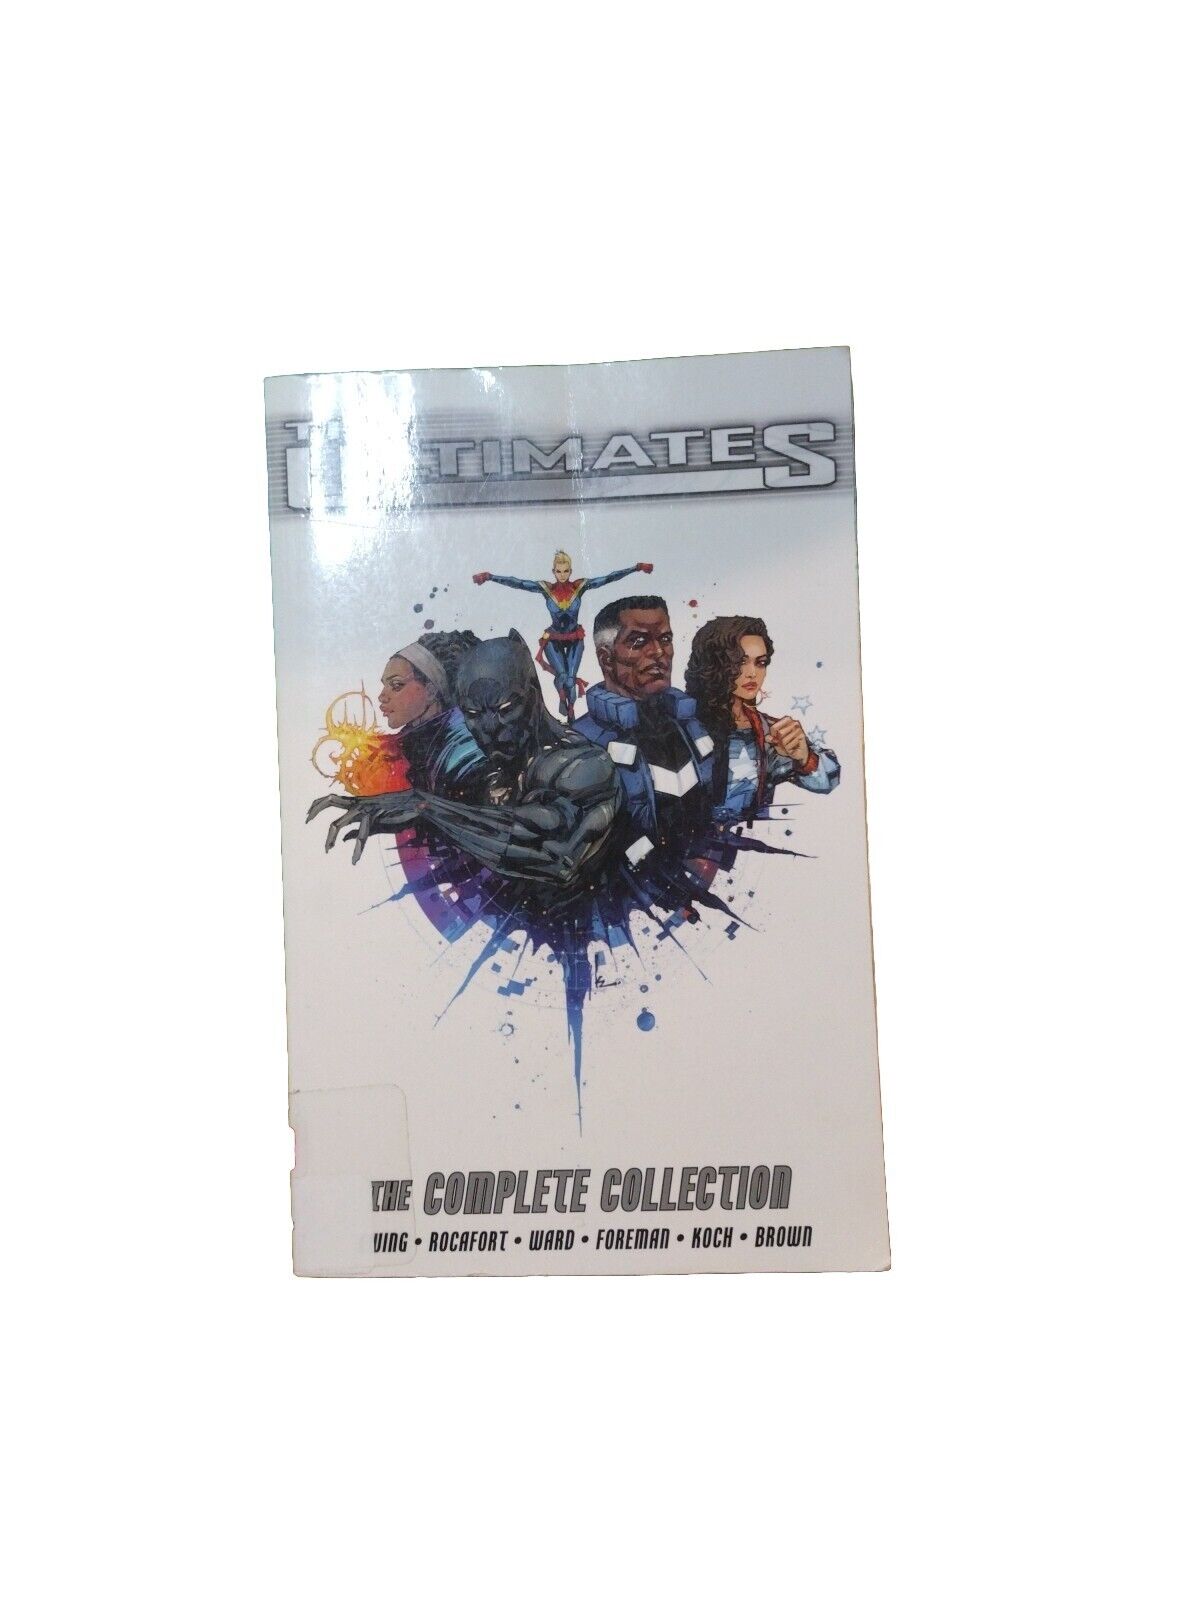 The Ultimates The Complete Collection By Ewing (EX LIBRIS, FORMER LIBRARY BOOK)